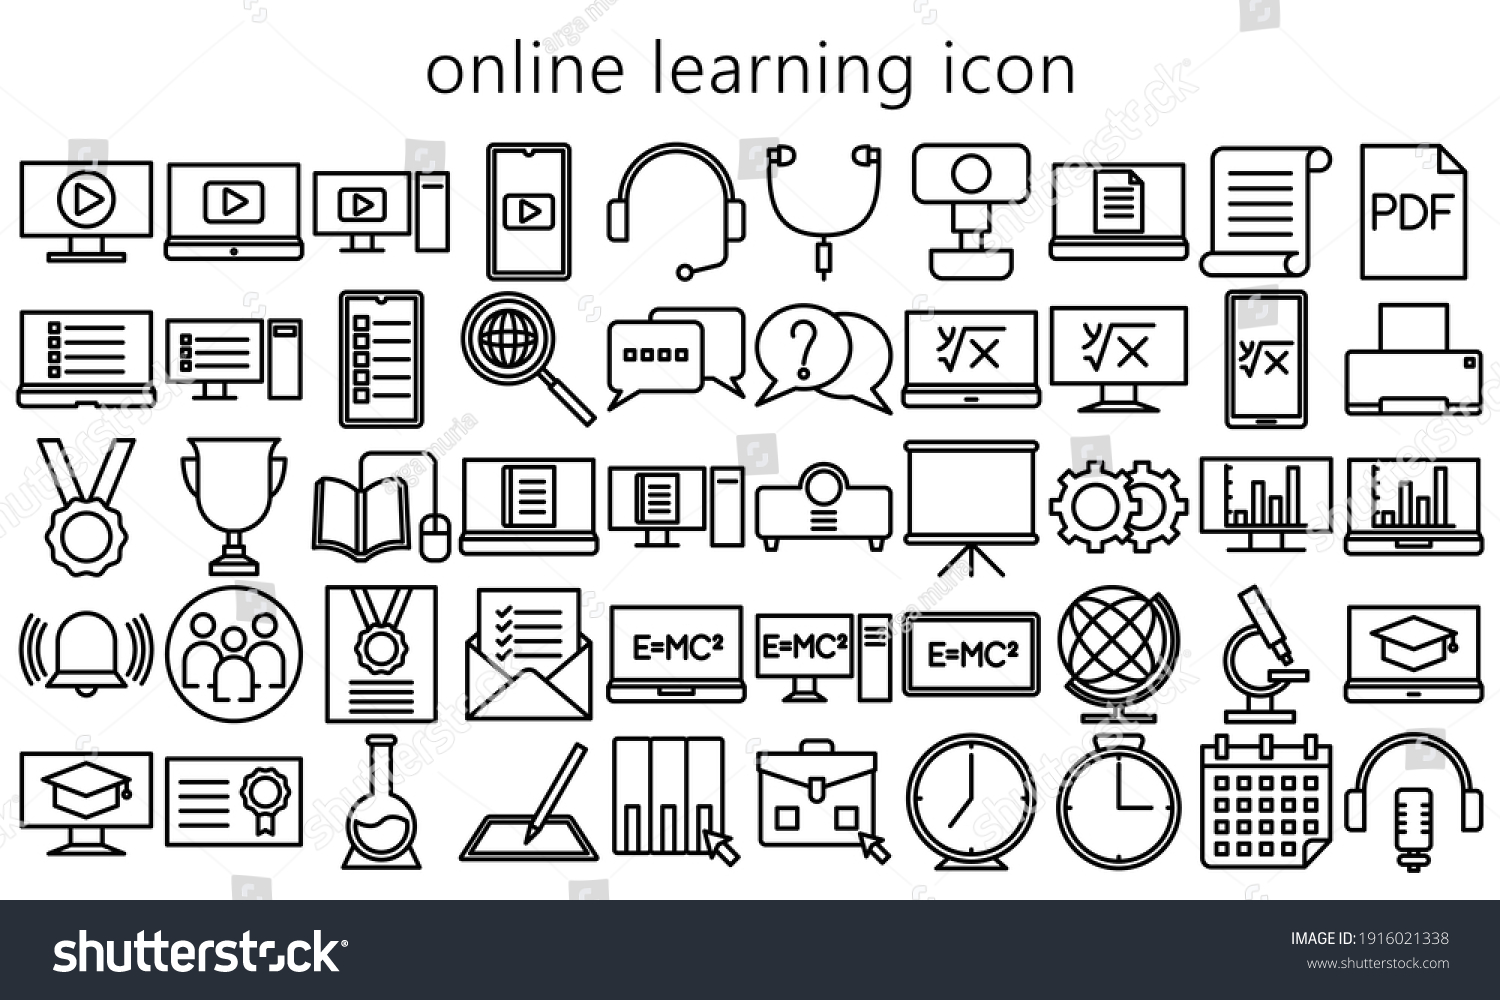 SVG of bundle of education online, Simple black bold outline icons set related to online learning. Symbols such as source programs, media equipment, ebook are included. vector EPS 10, ready convet to SVG svg